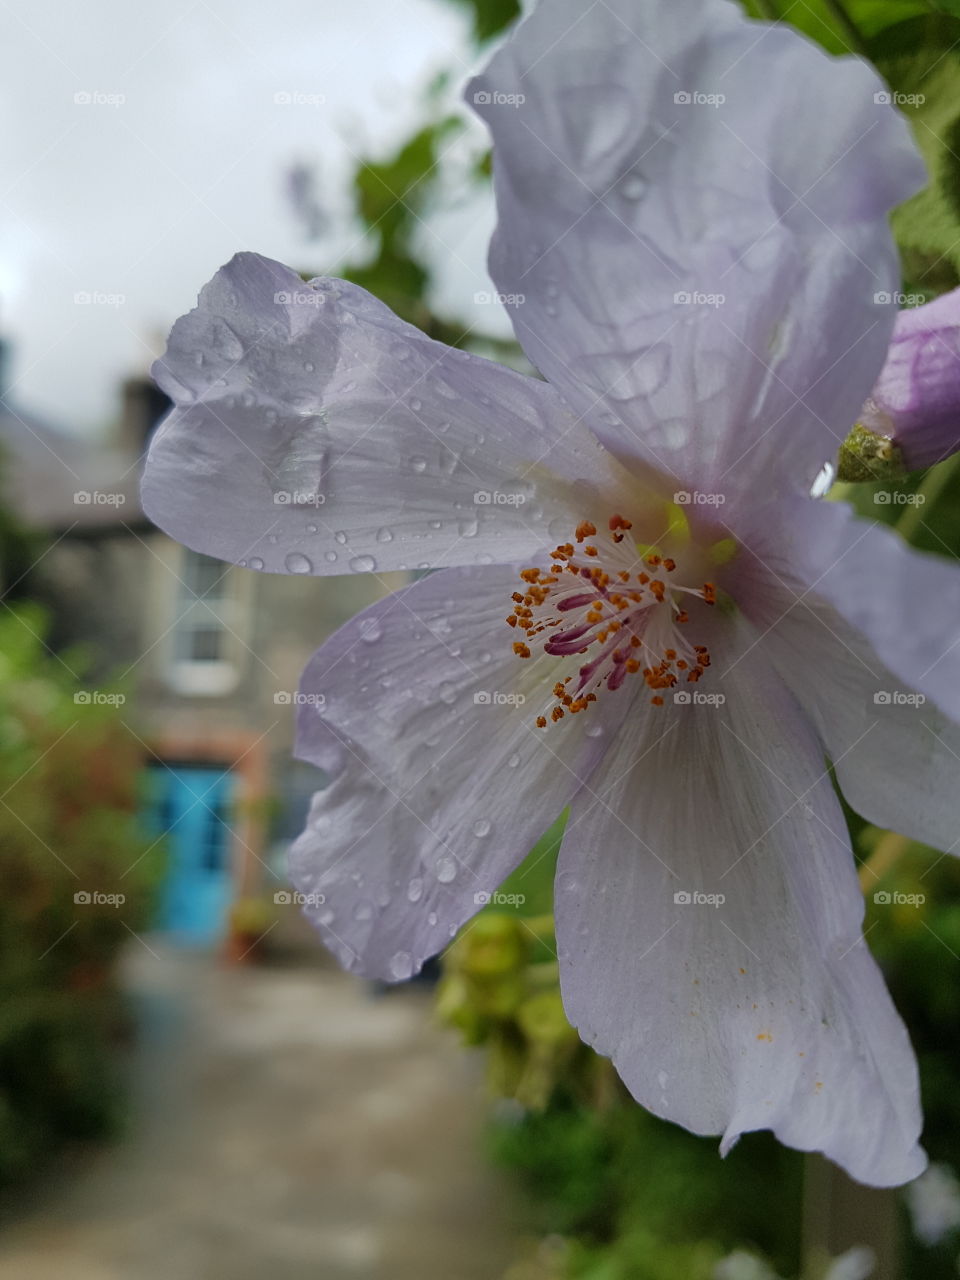 Raindrops on a flower